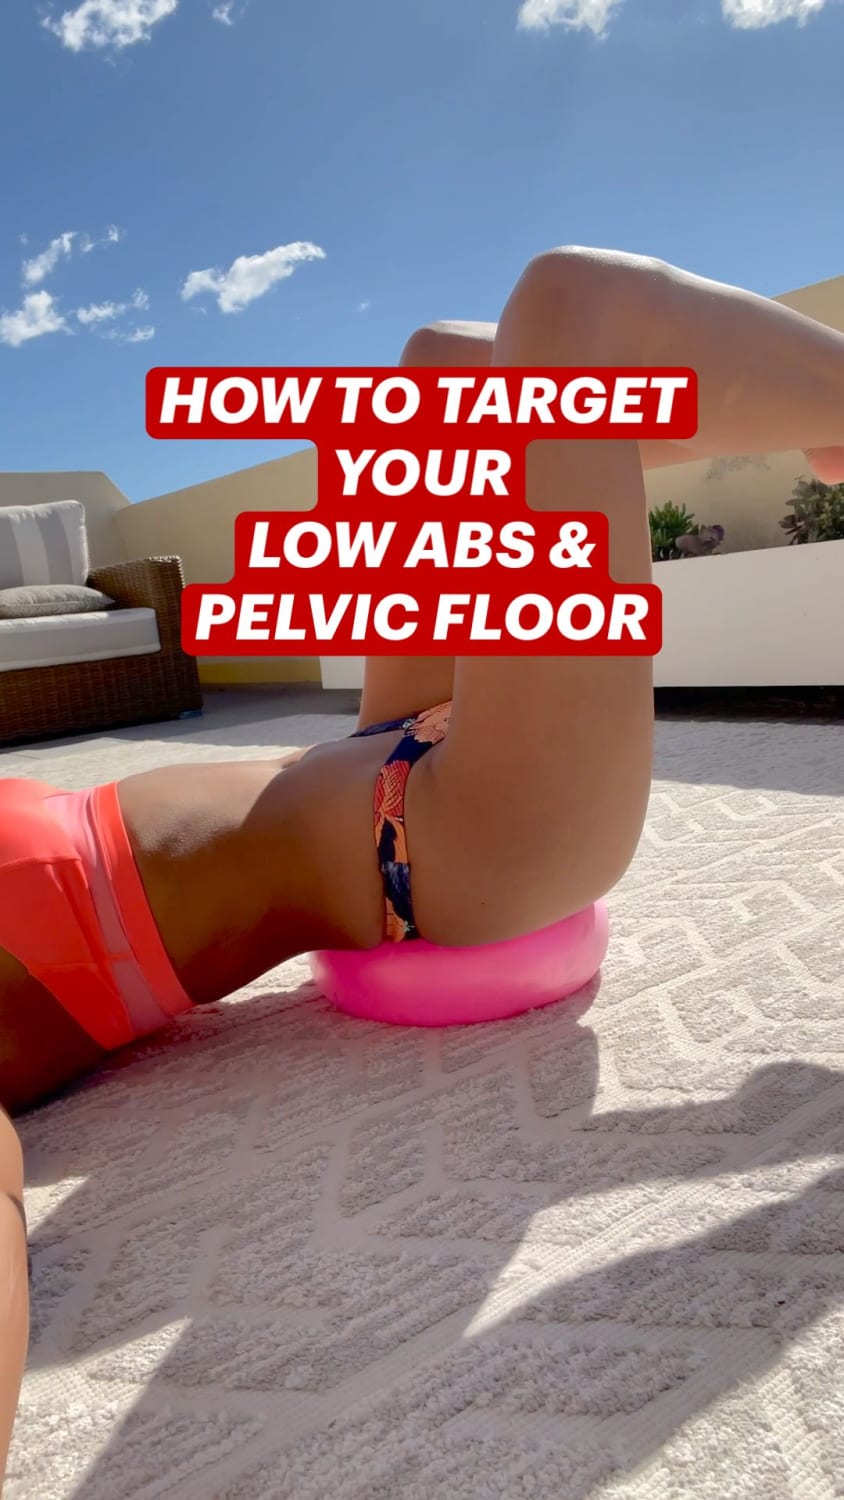 HOW TO TARGET YOUR LOW ABS & PELVIC FLOOR